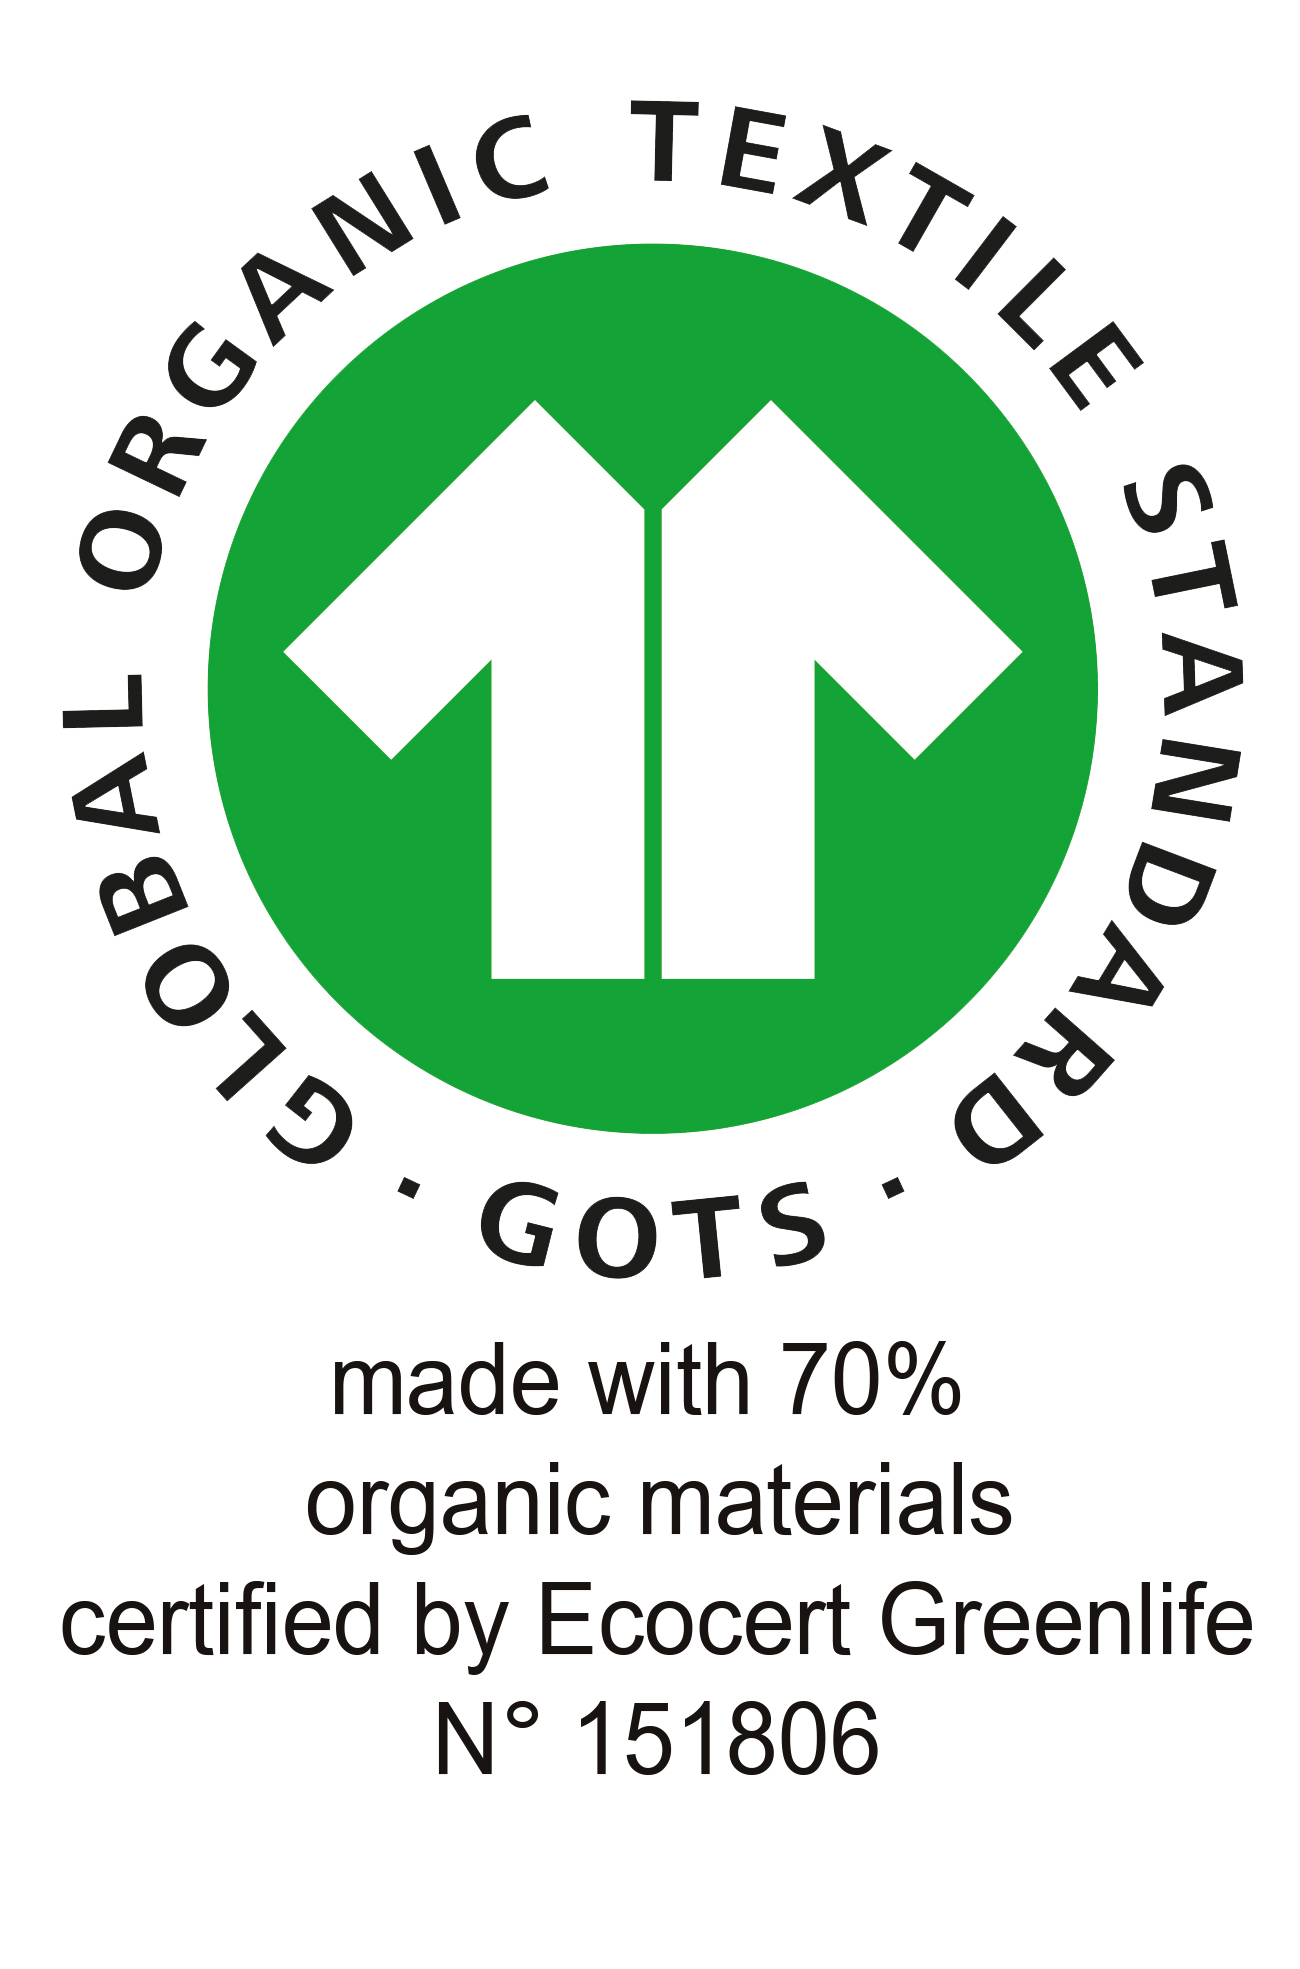 70% organic certified by Ecocert Greenlife N° 151806